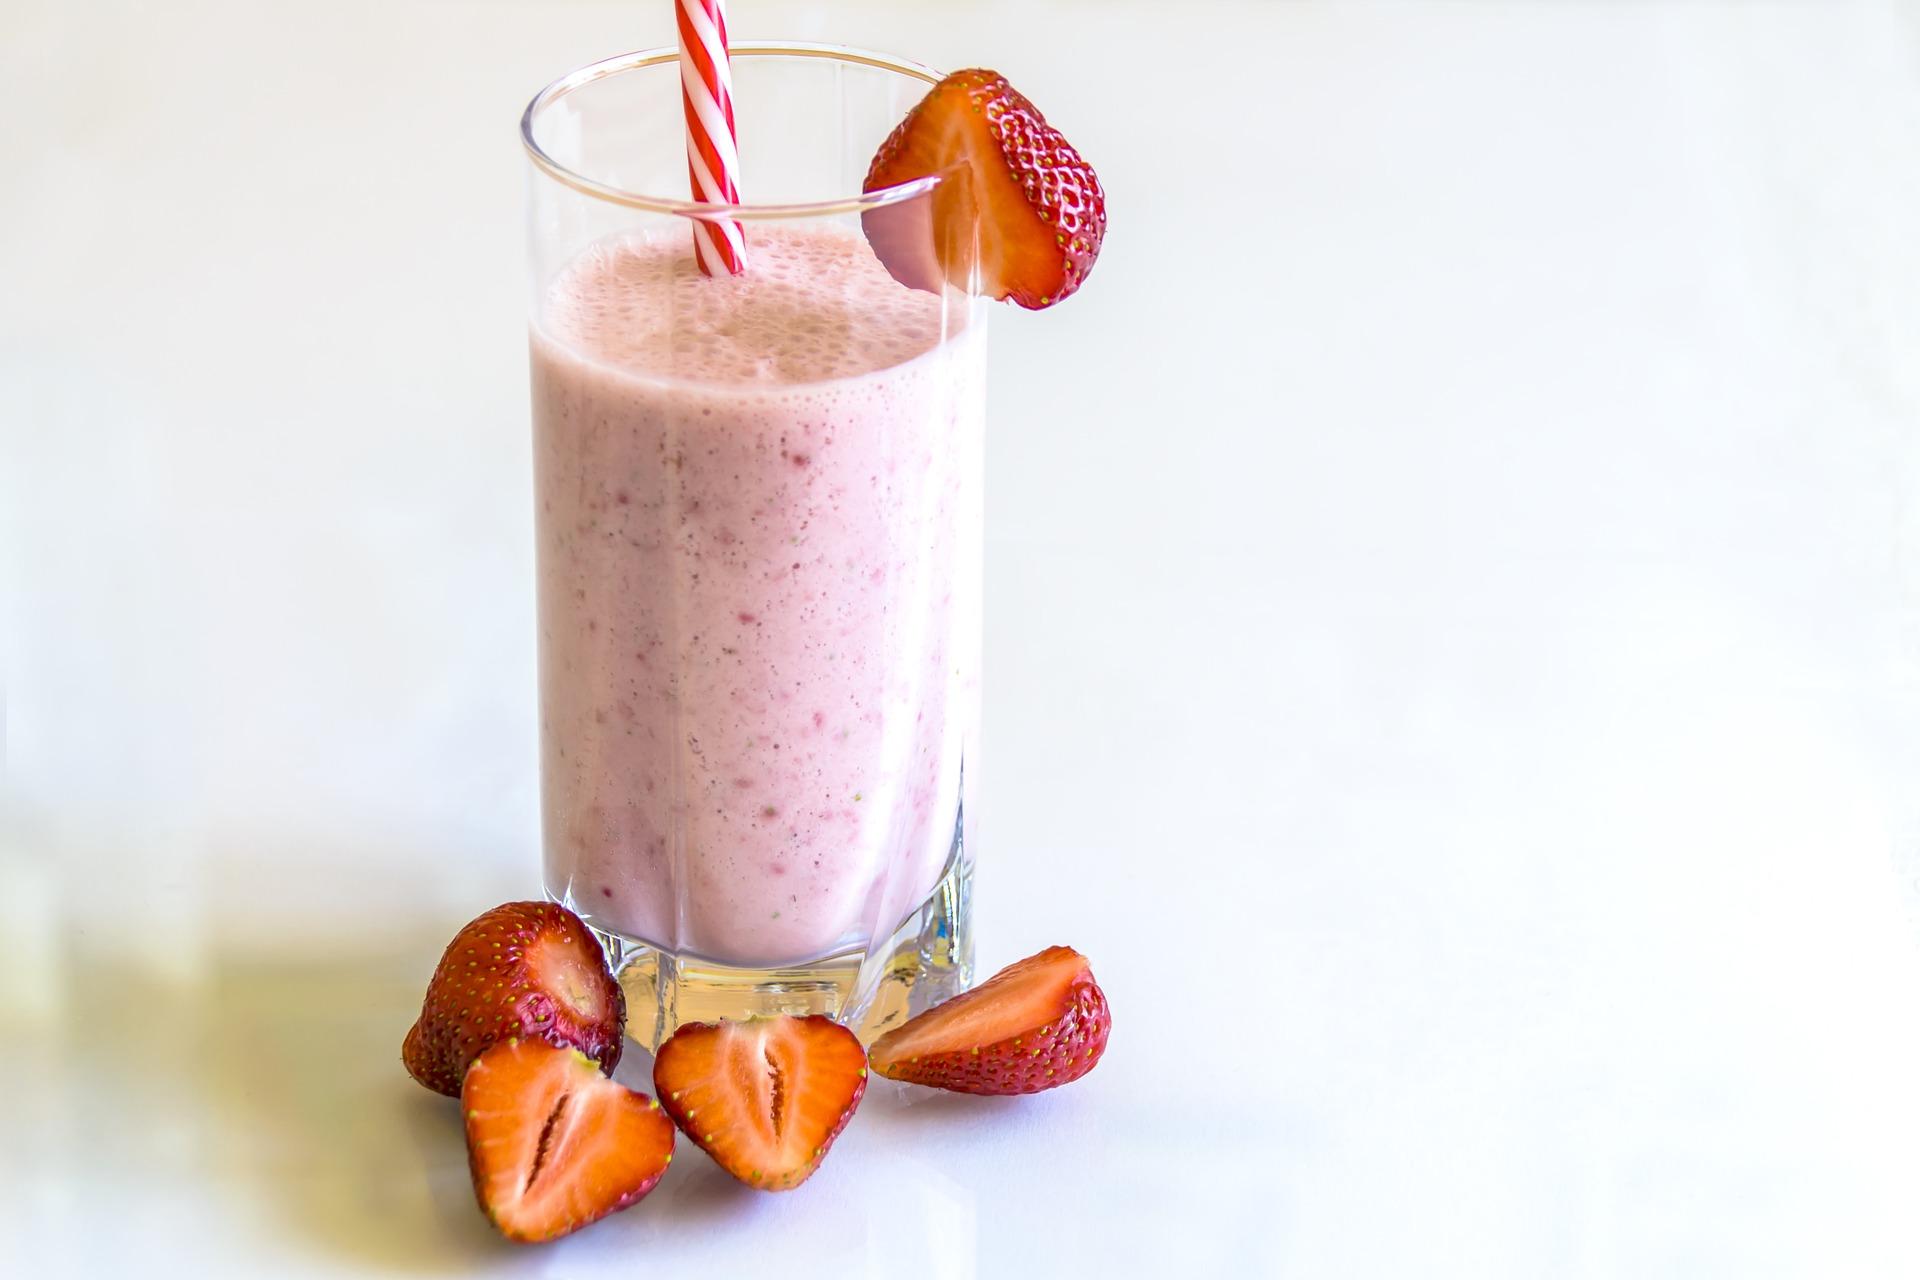 Strawberry smoothie in a large clear class with a red and white straw and garnished with strawberries around the glass.